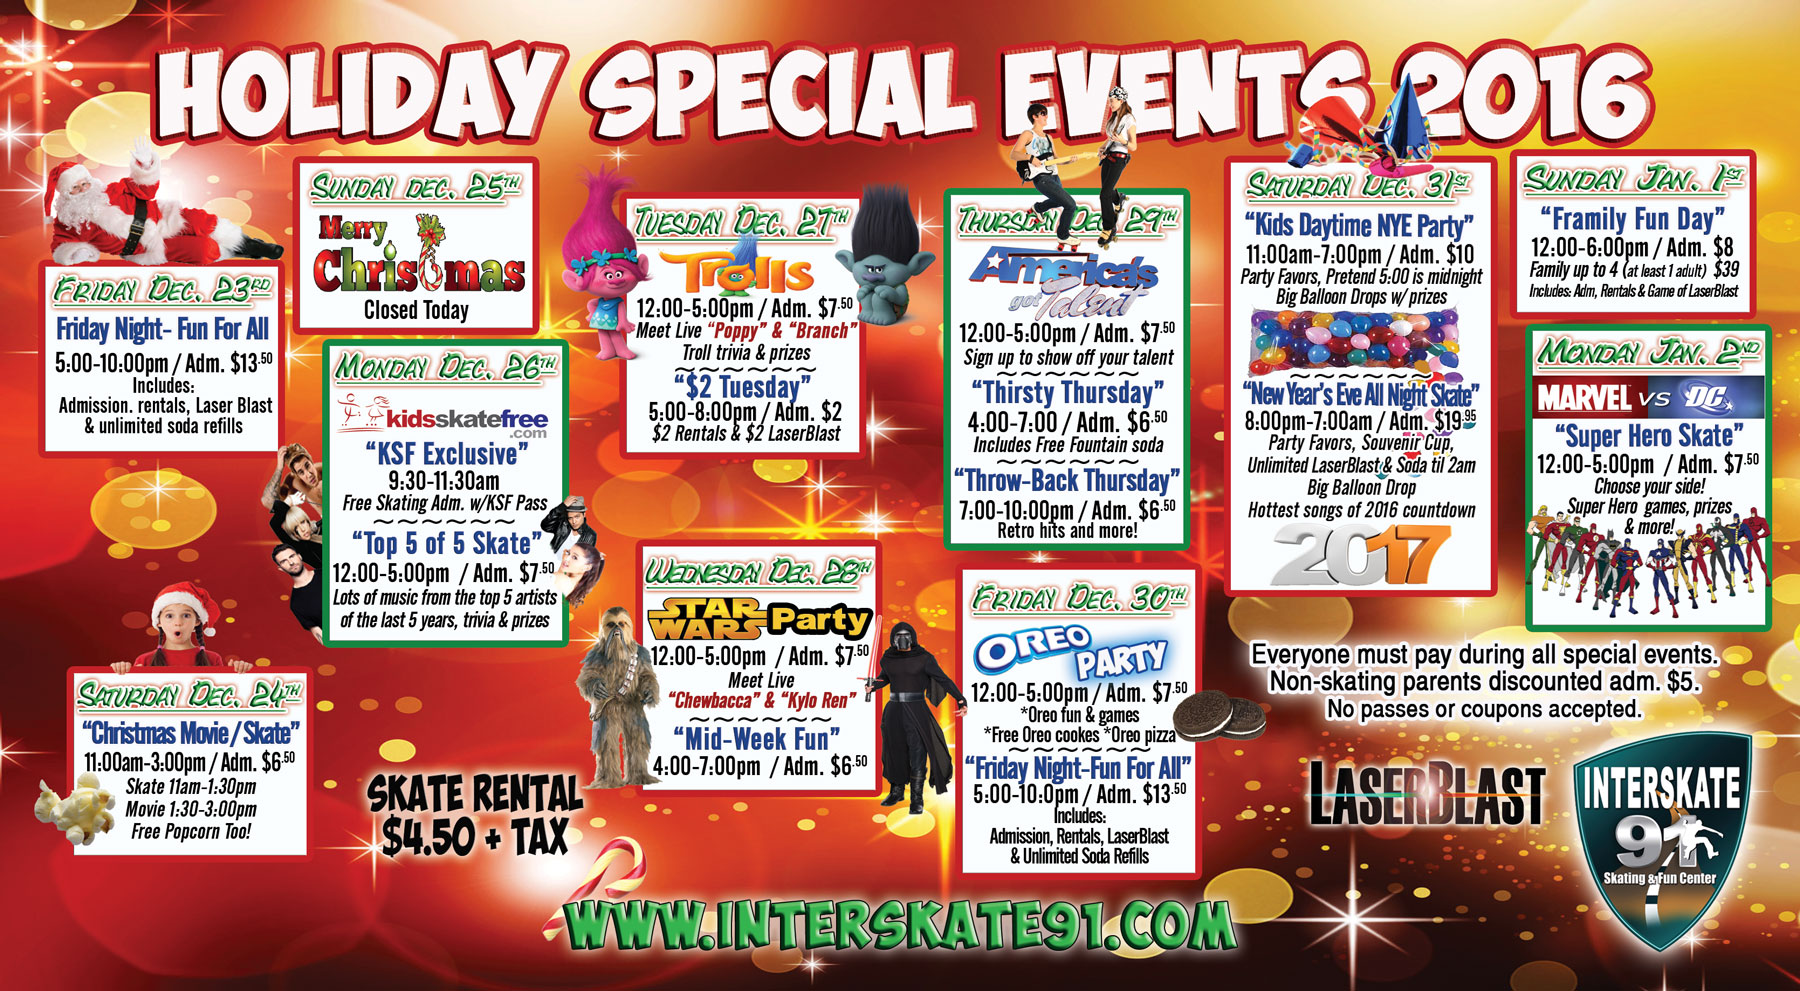 interskate-holiday-events-2016